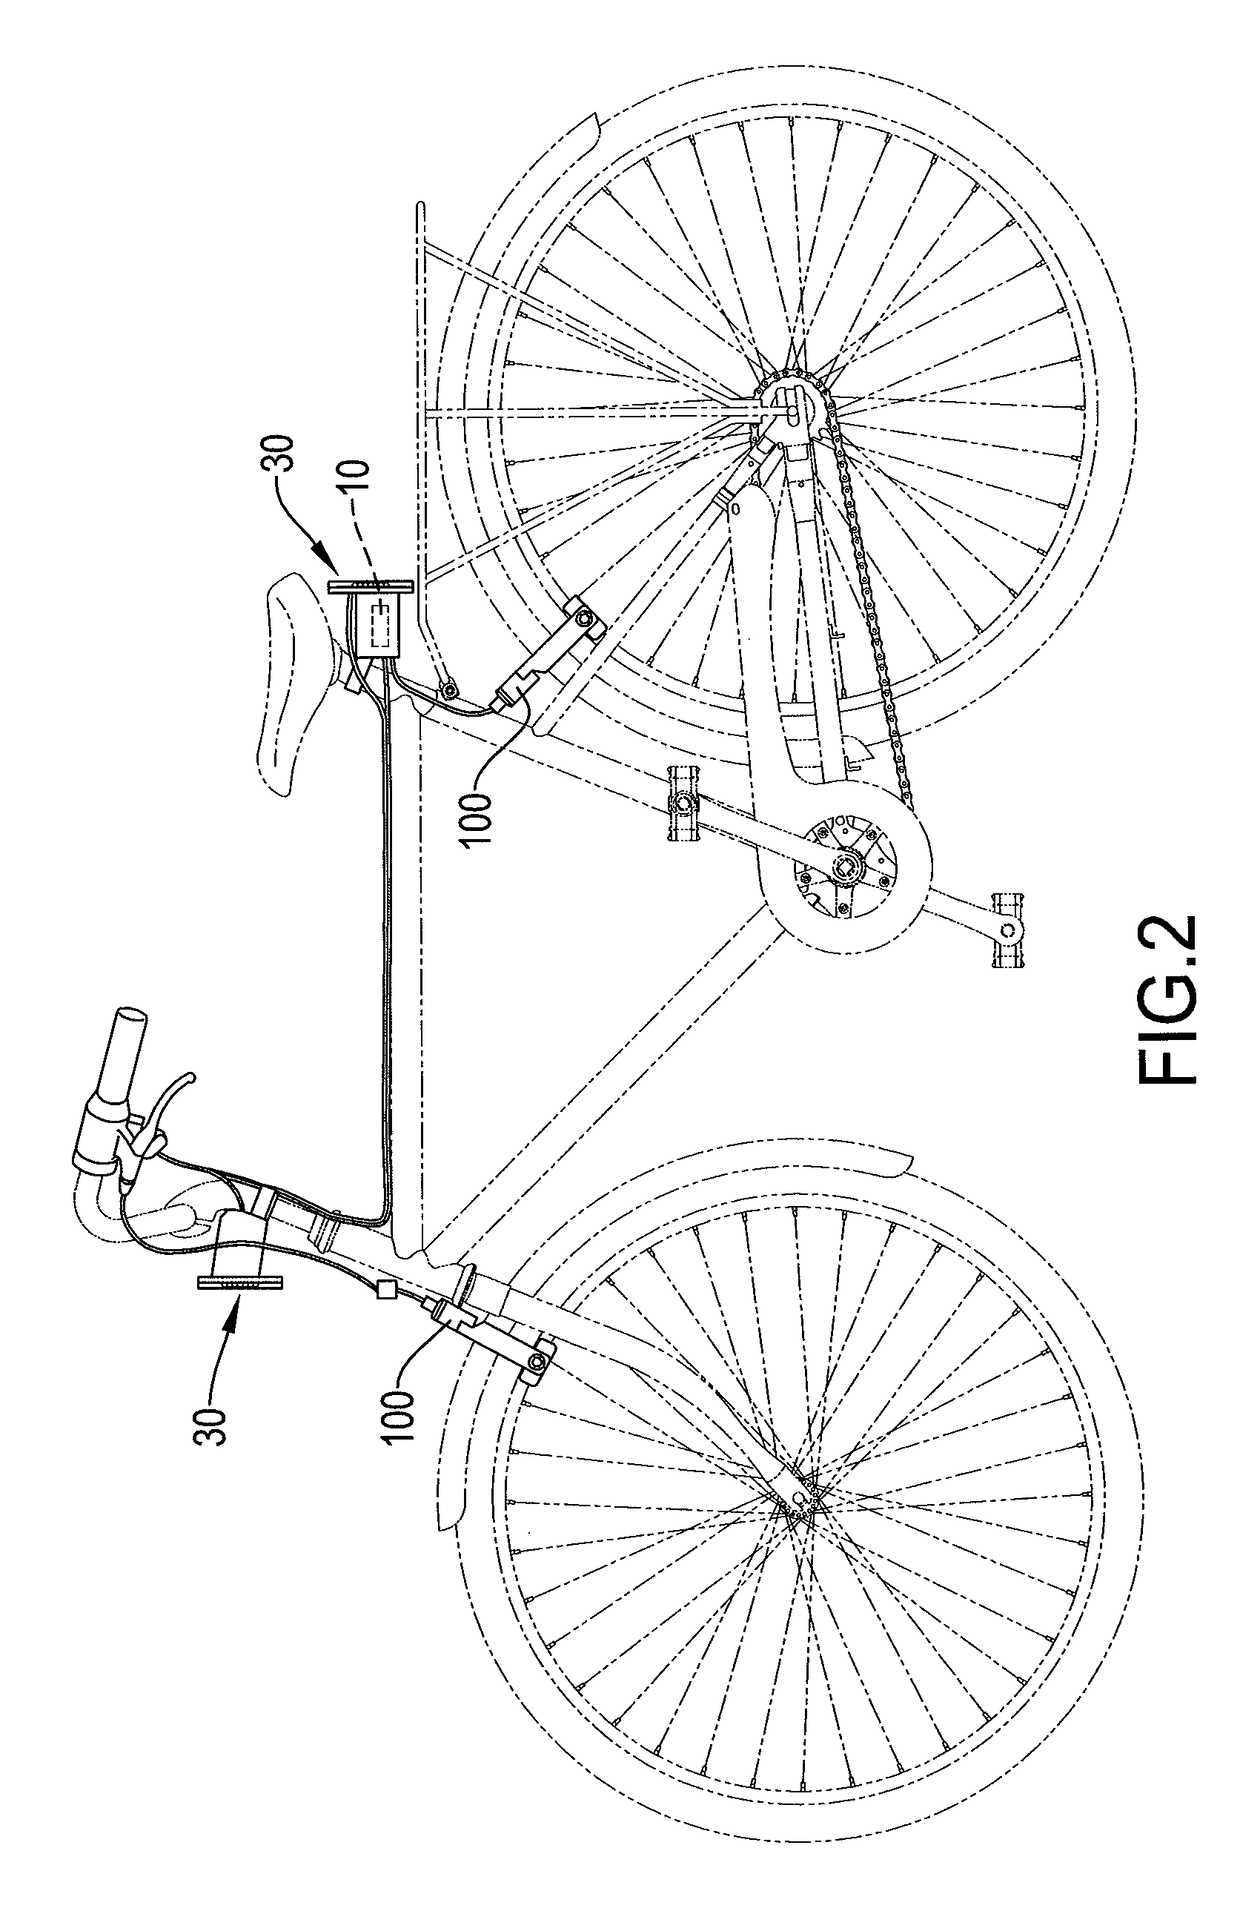 LED signaling device for a bicycle